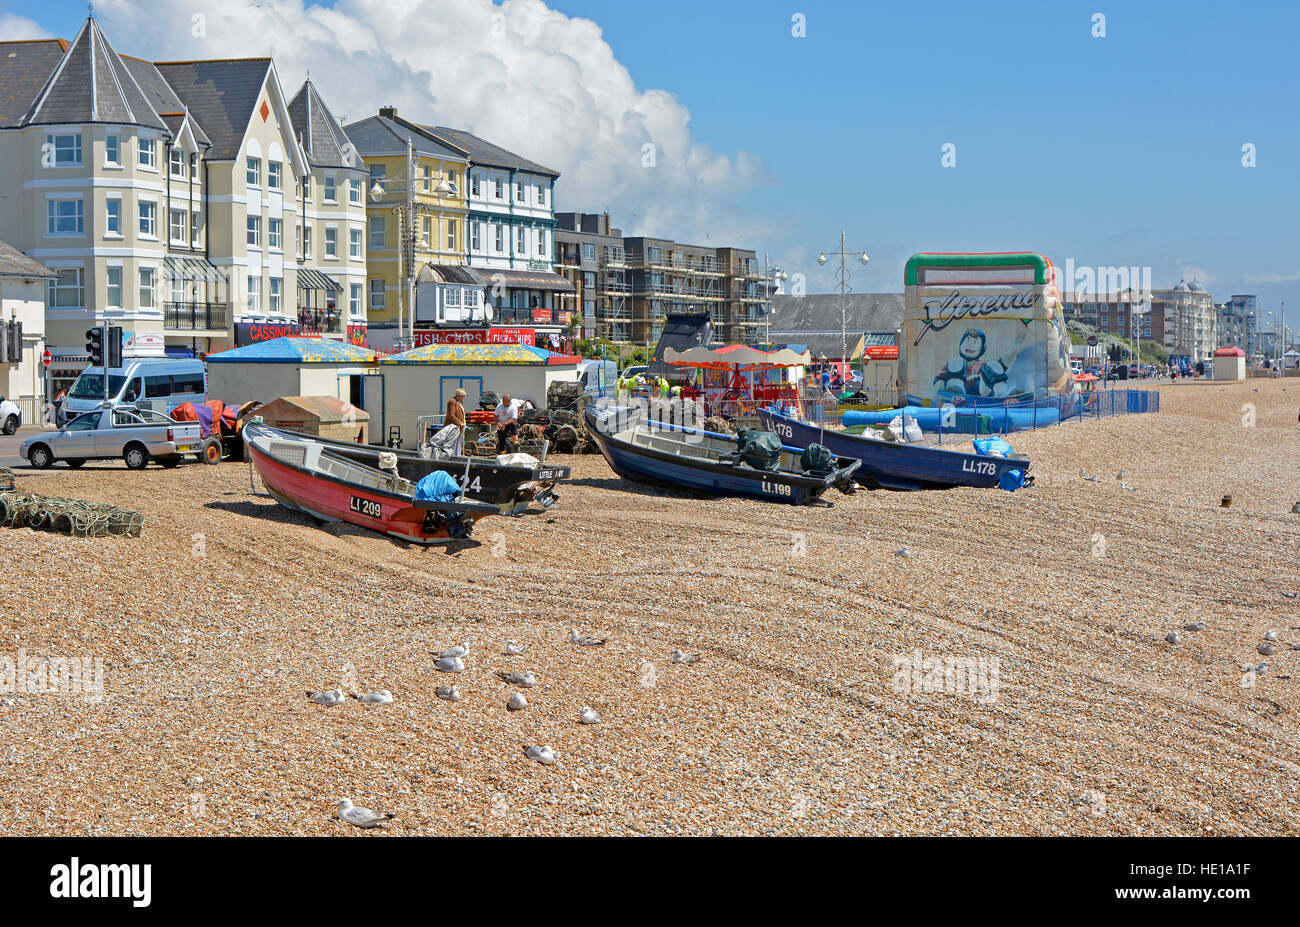 Seafront and shingle beach at Bognor Regis in West Sussex, England Stock Photo